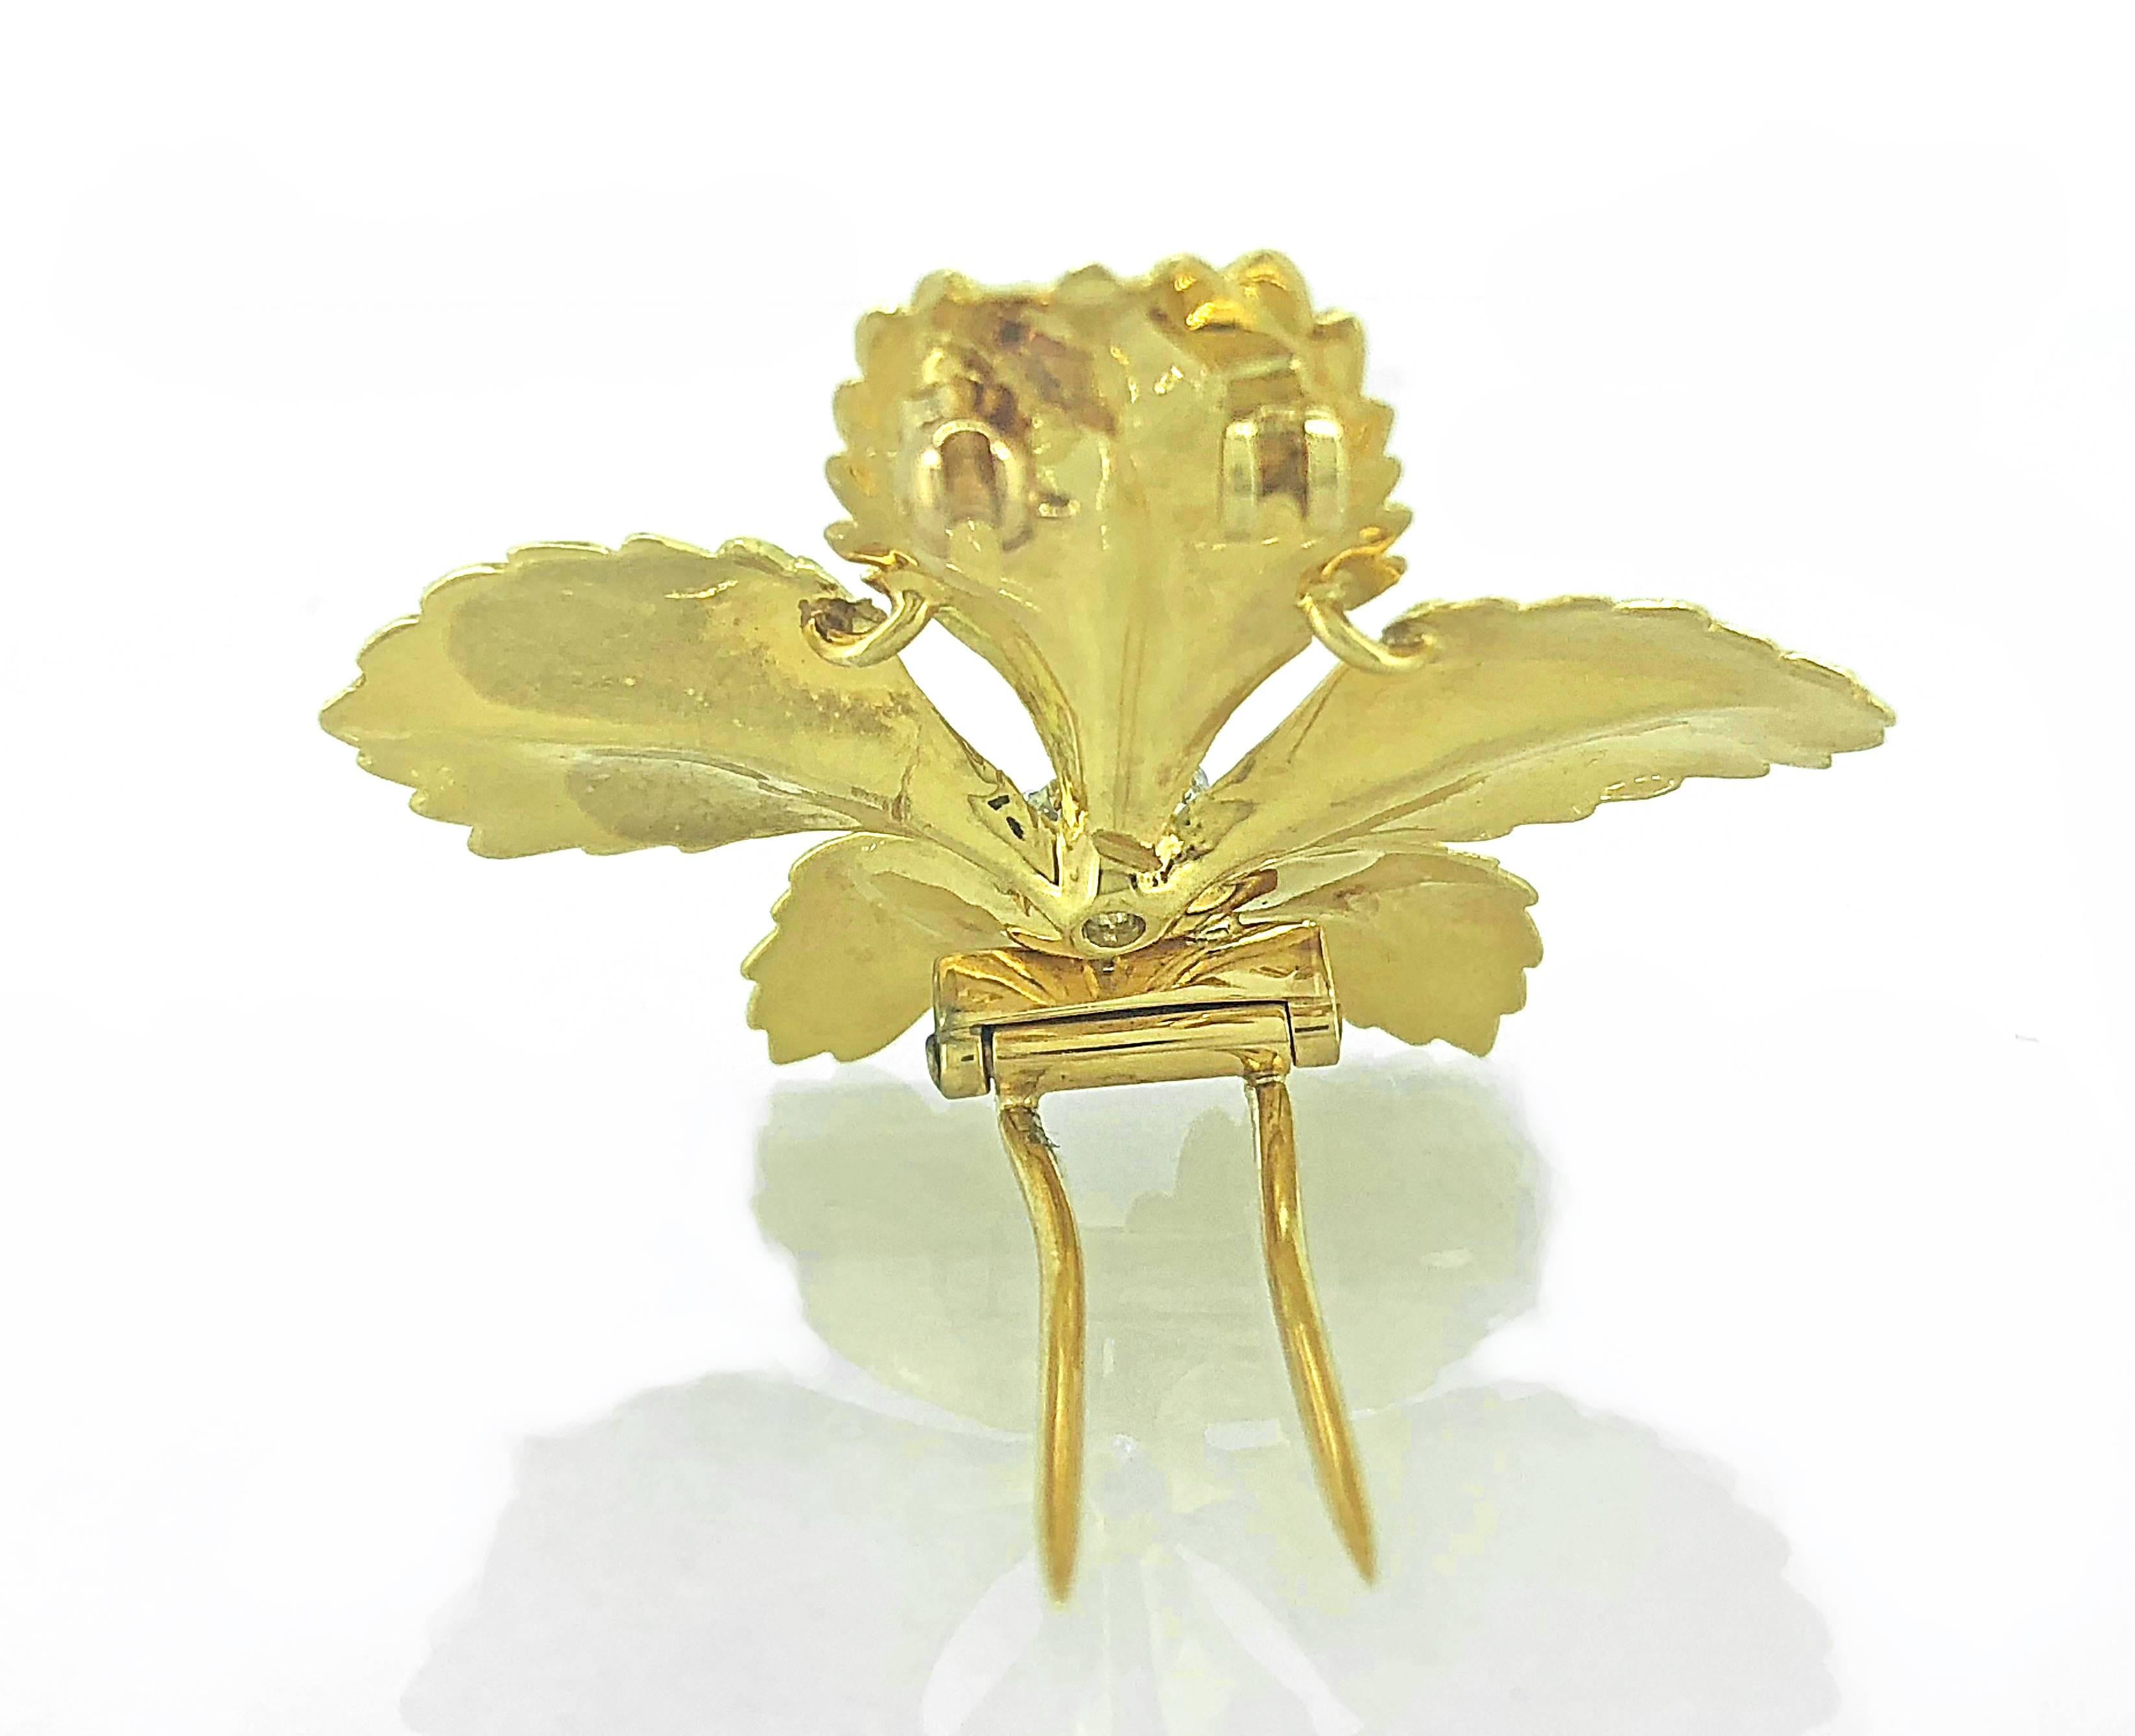 An absolutely stunning figleaf antique brooch crafted in 18K Yellow Gold featuring a .50ct. apx. European cut diamond. This brooch is of incredible high quality from the well known maker Cartier. Extraordinary workmanship shows off the fine details.